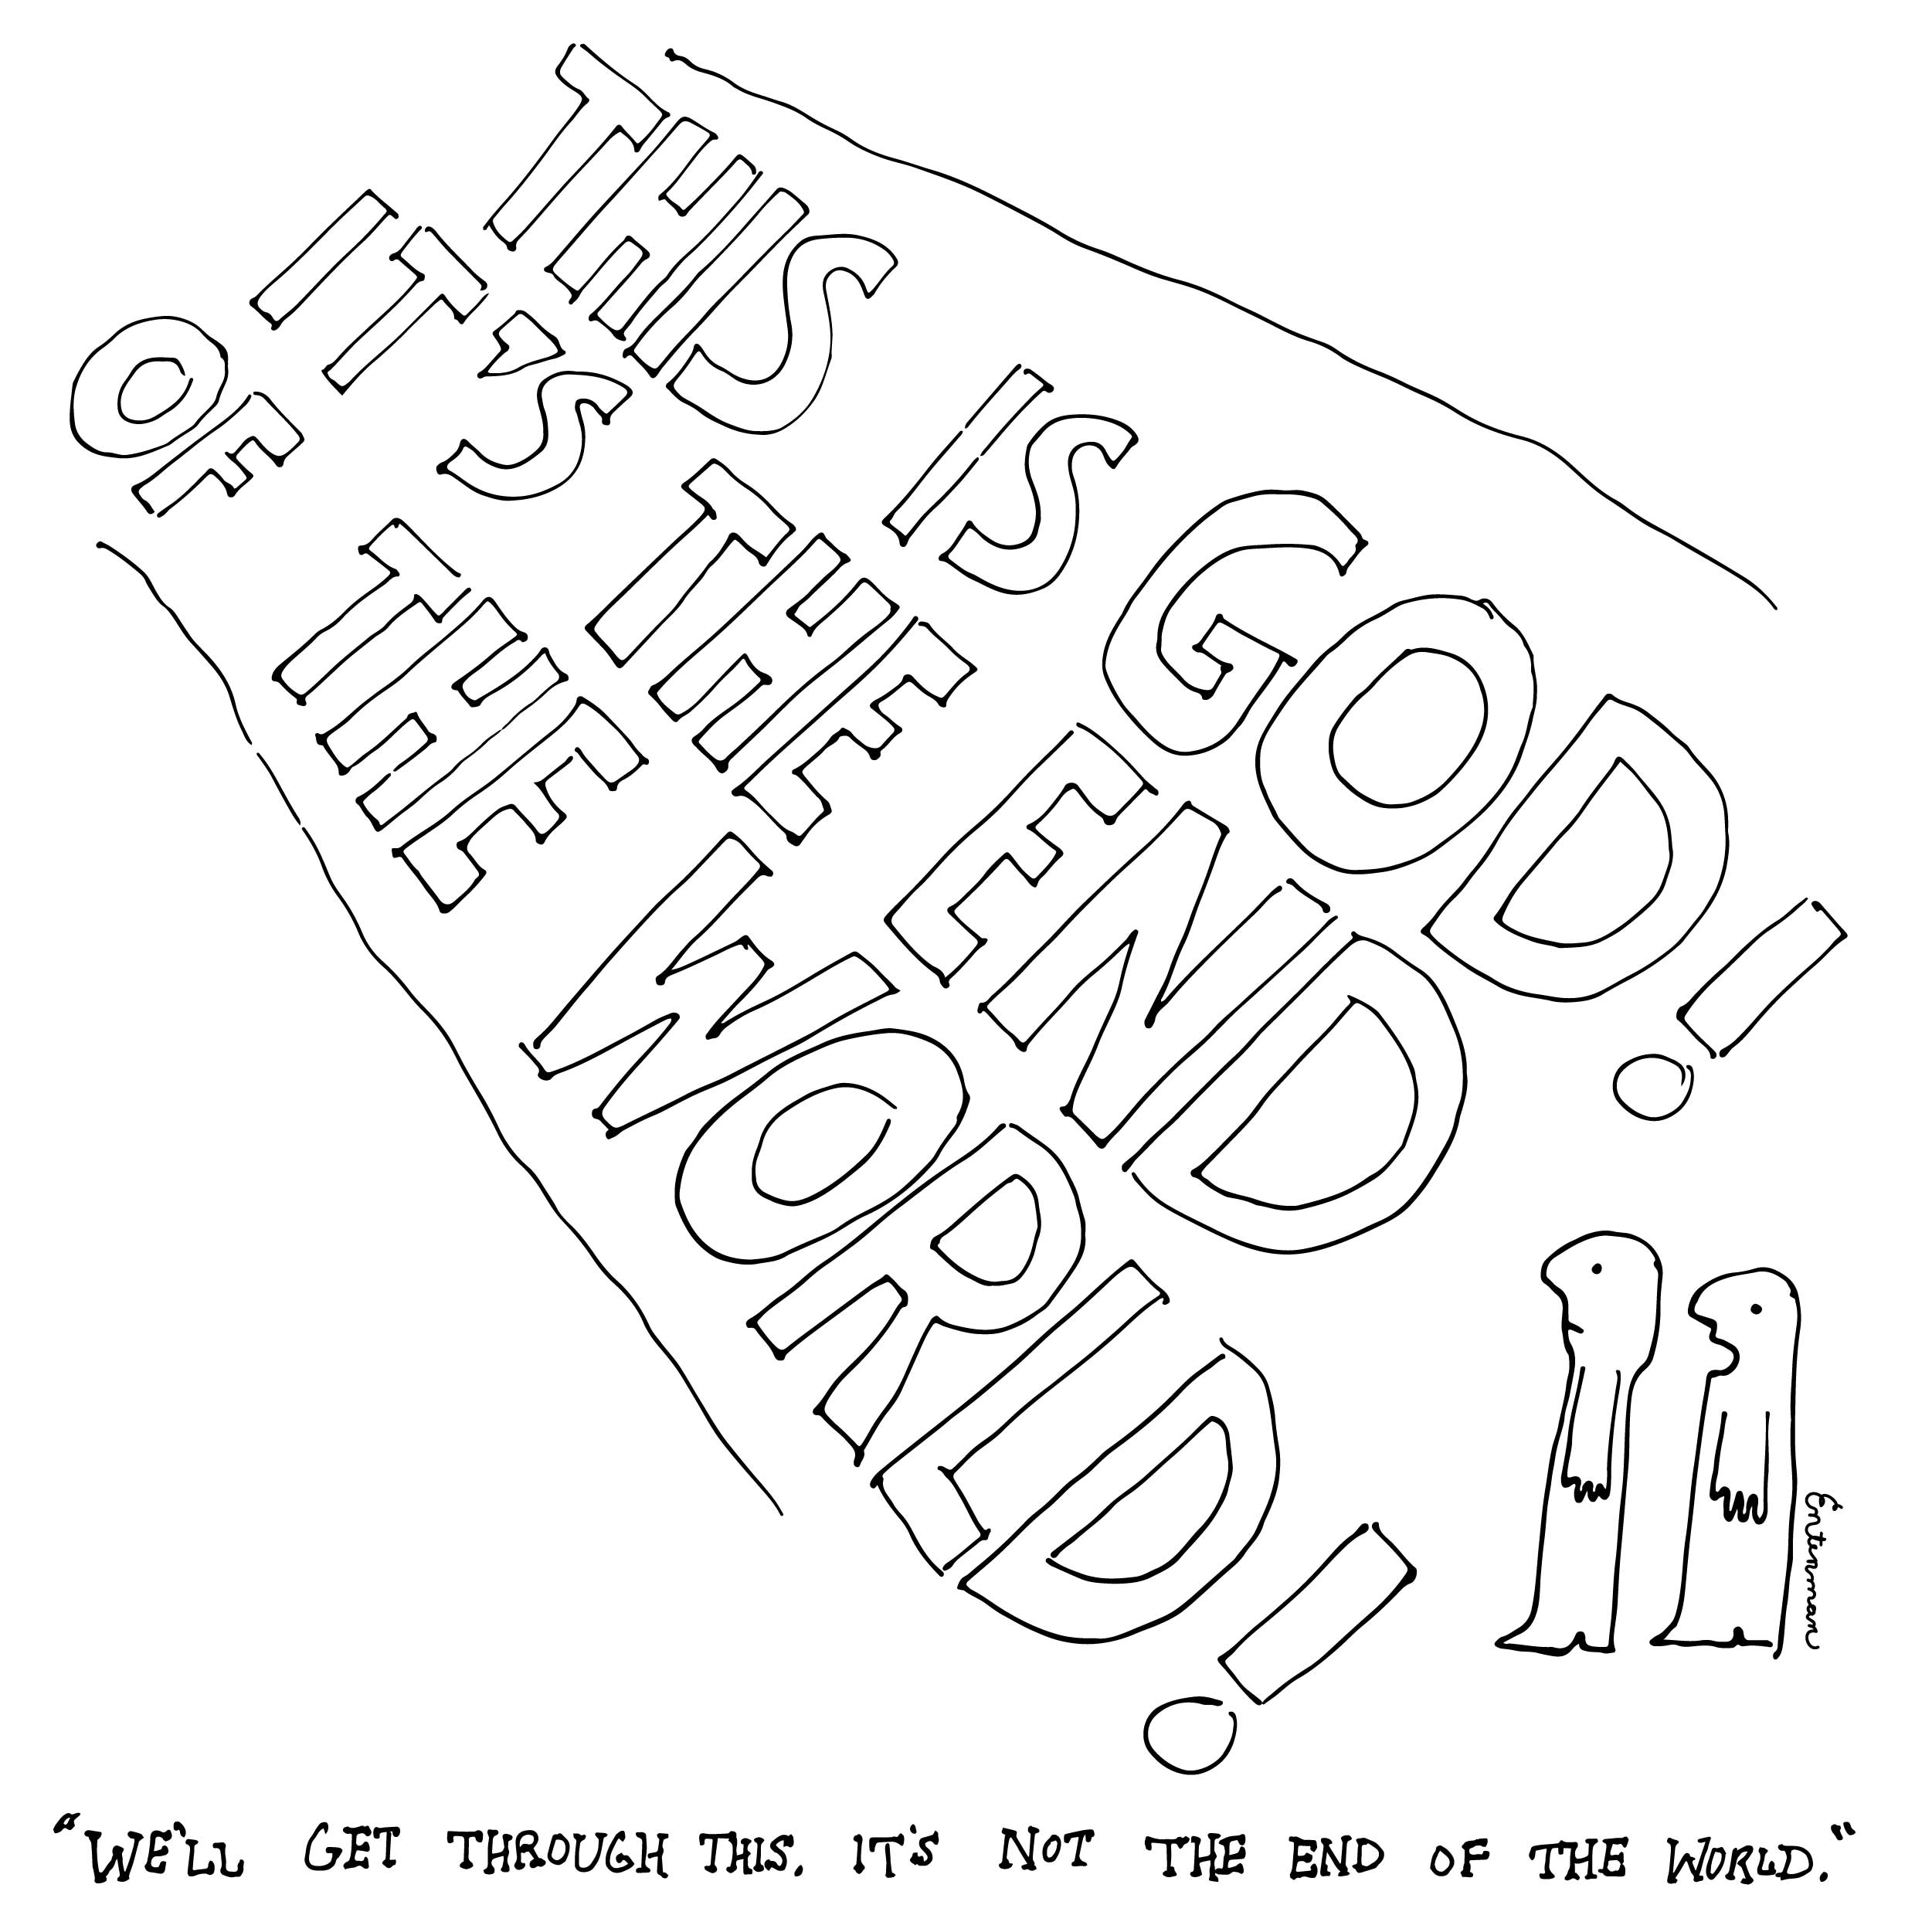 Cartoon of the Week - The End of the World